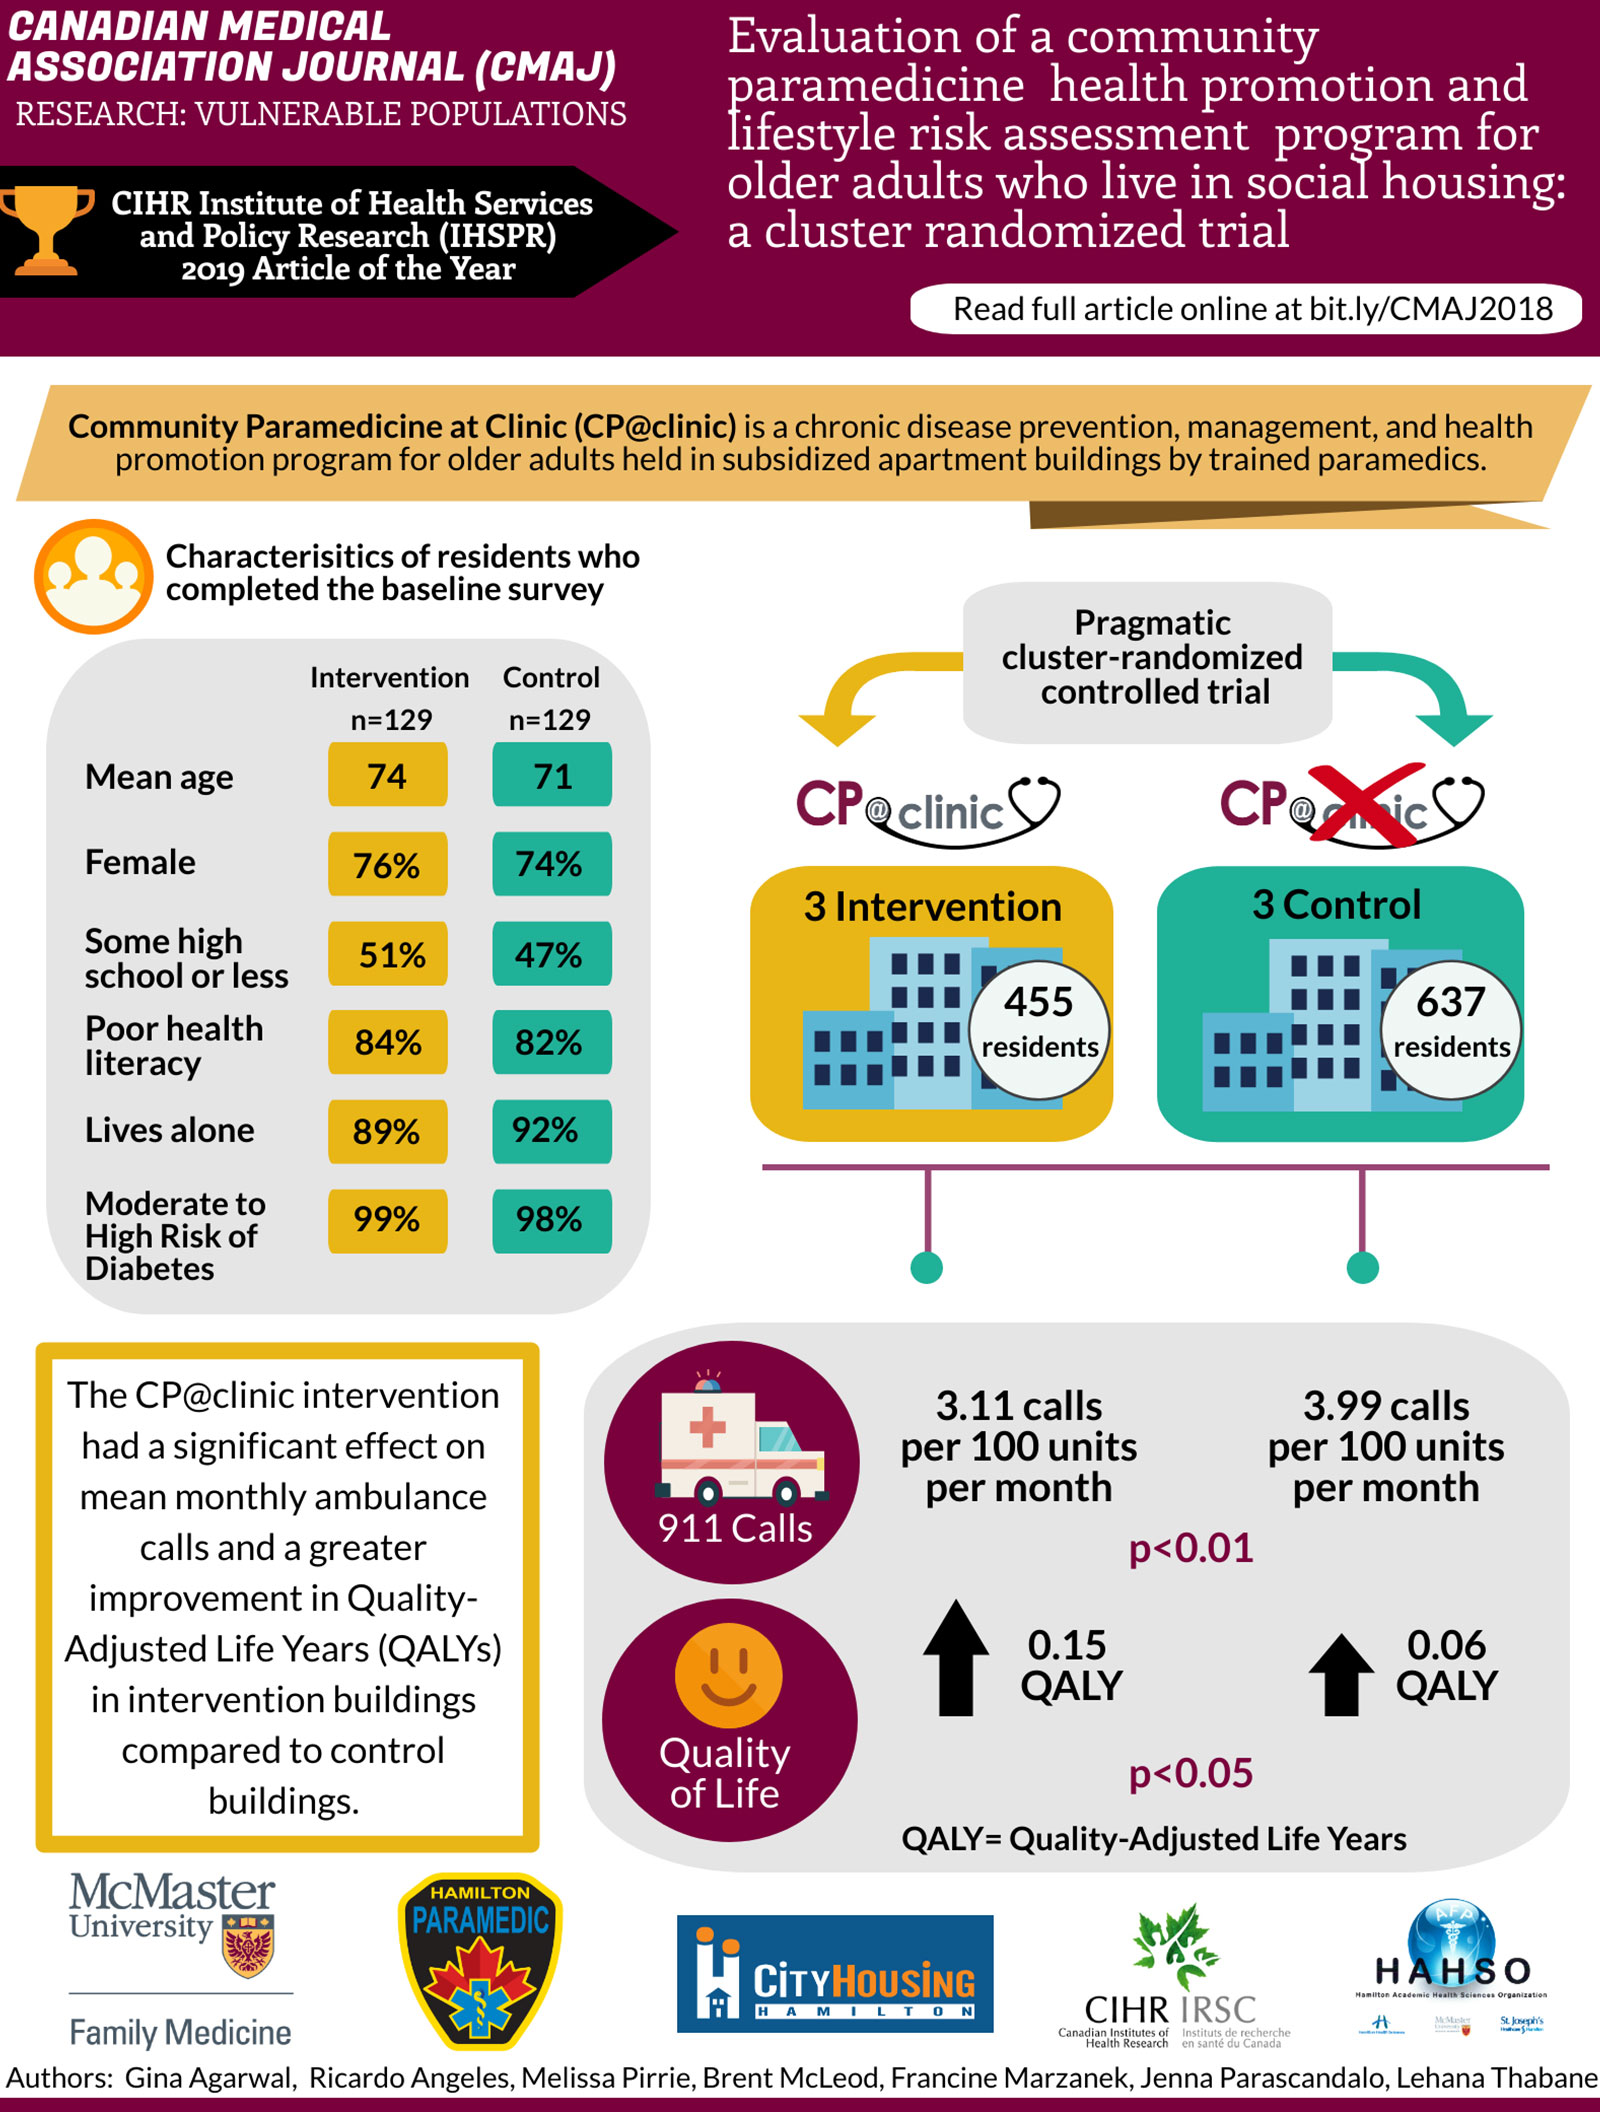 Infographic on the 2018 publication from the VIP Lab  in the Canadian Medical Association Journal, or CMAJ. On the top left is text that says Canadian Medical Association Journal CMAJ Research. Vulnerable populations. Below this is an icon of a trophy and text that says CIHR Institute of Health Services and Policy Research IHSPR 2019 Article of the year. At the top right is the title of the article, which is Evaluation of a community paramedicine health promotion and lifestyle risk assessment program for older adults who live in social housing, a cluster randomized trial. Below this says read full article online at bit dot LY forward slash CMAJ2018. Below the title banner is another banner that reads Community paramedicine at clinic or CP at clinic is a chronic disease prevention, management, and health promotion program for older adults held in subsidized apartment buildings by trained paramedics. Below this banner to the left is a title that says characteristics of residents who completed the baseline survey. The demographics are divided by Intervention n equals 129 and Control n equals 129. The demographics listed are as follows. 74 is the mean age in Intervention, 71 in control. 76 percent of intervention and 74 percent of control are female. 51 percent of intervention and 47 percent of control have some high school or less. 84 percent of intervention and 82 percent of control have poor health literacy. 89 percent of intervention and 92 percent of control live alone. 99 percent of intervention and 98 percent of controls have moderate to high risk of diabetes. Below these demographics is text that says the CP at clinic intervention had a significant effect on mean monthly ambulance calls and a greater improvement in Quality Adjusted Life years or QALYs in intervention buildings compared to control buildings. To the right of the demographics and this text is a diagram showing the flow vertically from study results to methods. At the top, text says pragmatic cluster randomized controlled trial. From this text there are two arrows. One arrow branches to the left and down and the other to the right and down. On the left the arrow points to the CP at clinic logo, text that says 3 Intervention, and an icon of 3 apartment buildings overlaid with text that says 455 residents. On the left, the arrow points to the CP at clinic logo with an X over it, text that says 3 Control, and an icon of 3 apartment buildings overlaid with text that says 637 residents. Under these diagrams is a horizontal line with two vertical branches, one directly beneath each icon of 3 apartment buildings. Beneath these branches is a box with a summary of results. On the top far left of the box is a bubble with an icon of an ambulance with text that says 9 1 1 calls, and under that is a bubble with an icon of a smiley face and text that says quality of life. Directly below the branches reaching from the 3 Intervention building apartment icons and 3 Control building apartment icons is text that says, respectively, 3.11 calls per 100 units per month and 3.99 calls per 100 units per month. Between these two results is text that says p less than 0.01. Below these results from left to right, beside the quality of life icon and smiley, is an arrow pointing upward and text that says 0.15 QALY, text that says p less than 0.05, and an arrow pointing upward that says 0.06 QALY. At the bottom of the box says QALY equals Quality adjusted life years. Across the bottom of the infographic from left to right are the logos for the McMaster University Department of Family Medicine, Hamilton Paramedic Services, City Housing Hamilton, the Canadian Institute for Health Research, and Hamilton Academic Health Sciences Organization. Below these logos is text that says author names, which are Gina Agarwal, Ricardo Angeles, Melissa Pirrie, Brent McLeod, Francine Marzanek, Jenna Parascandalo, Lehana Thabane.